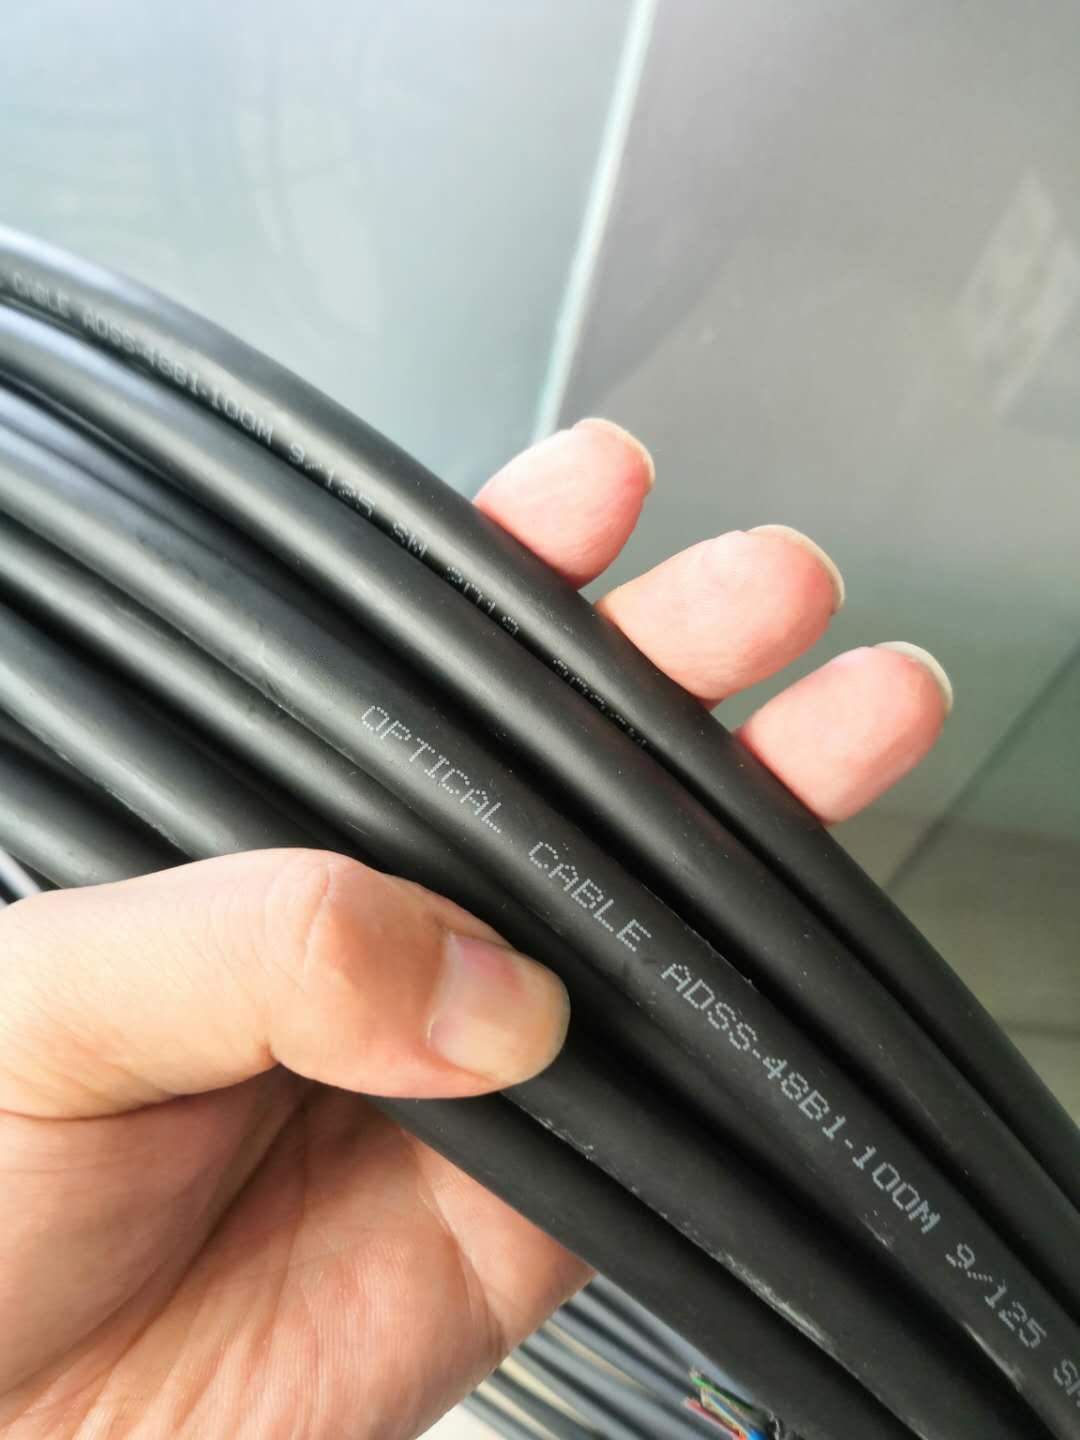 https://www.ksdfibercable.com/adss-cable/